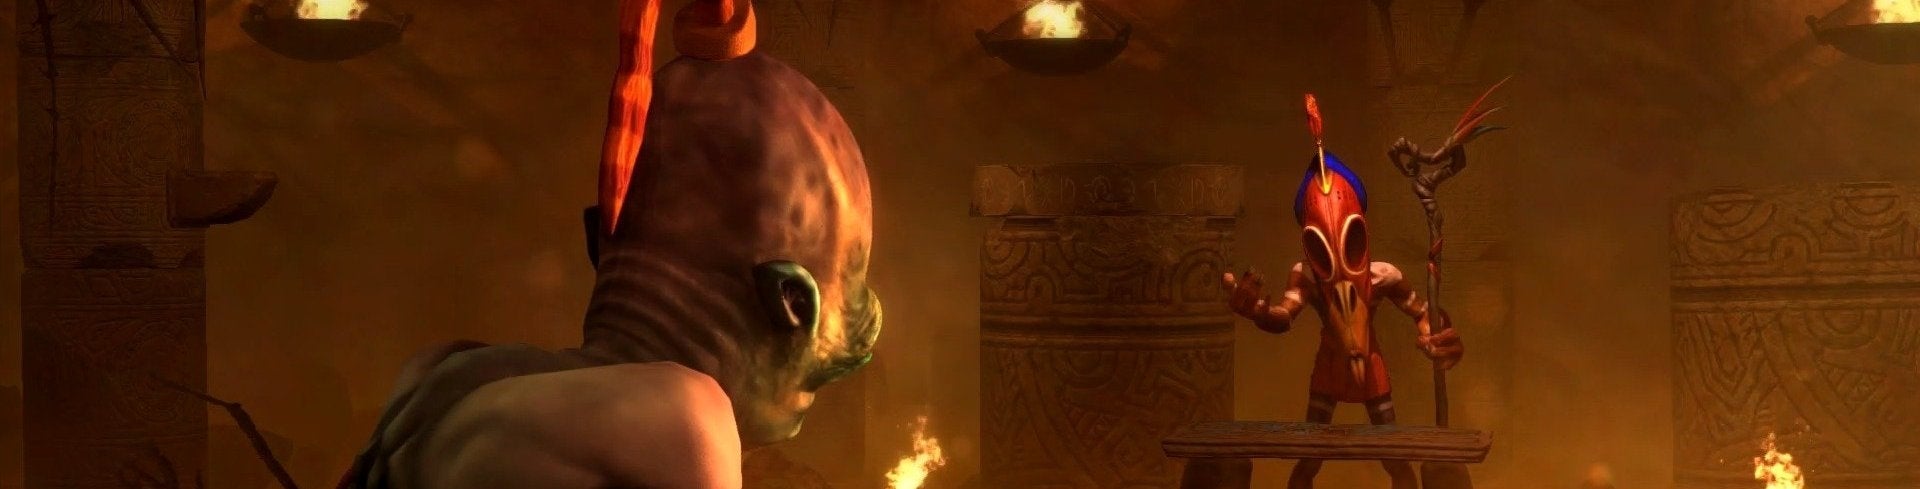 Image for Oddworld: New 'n' Tasty! review